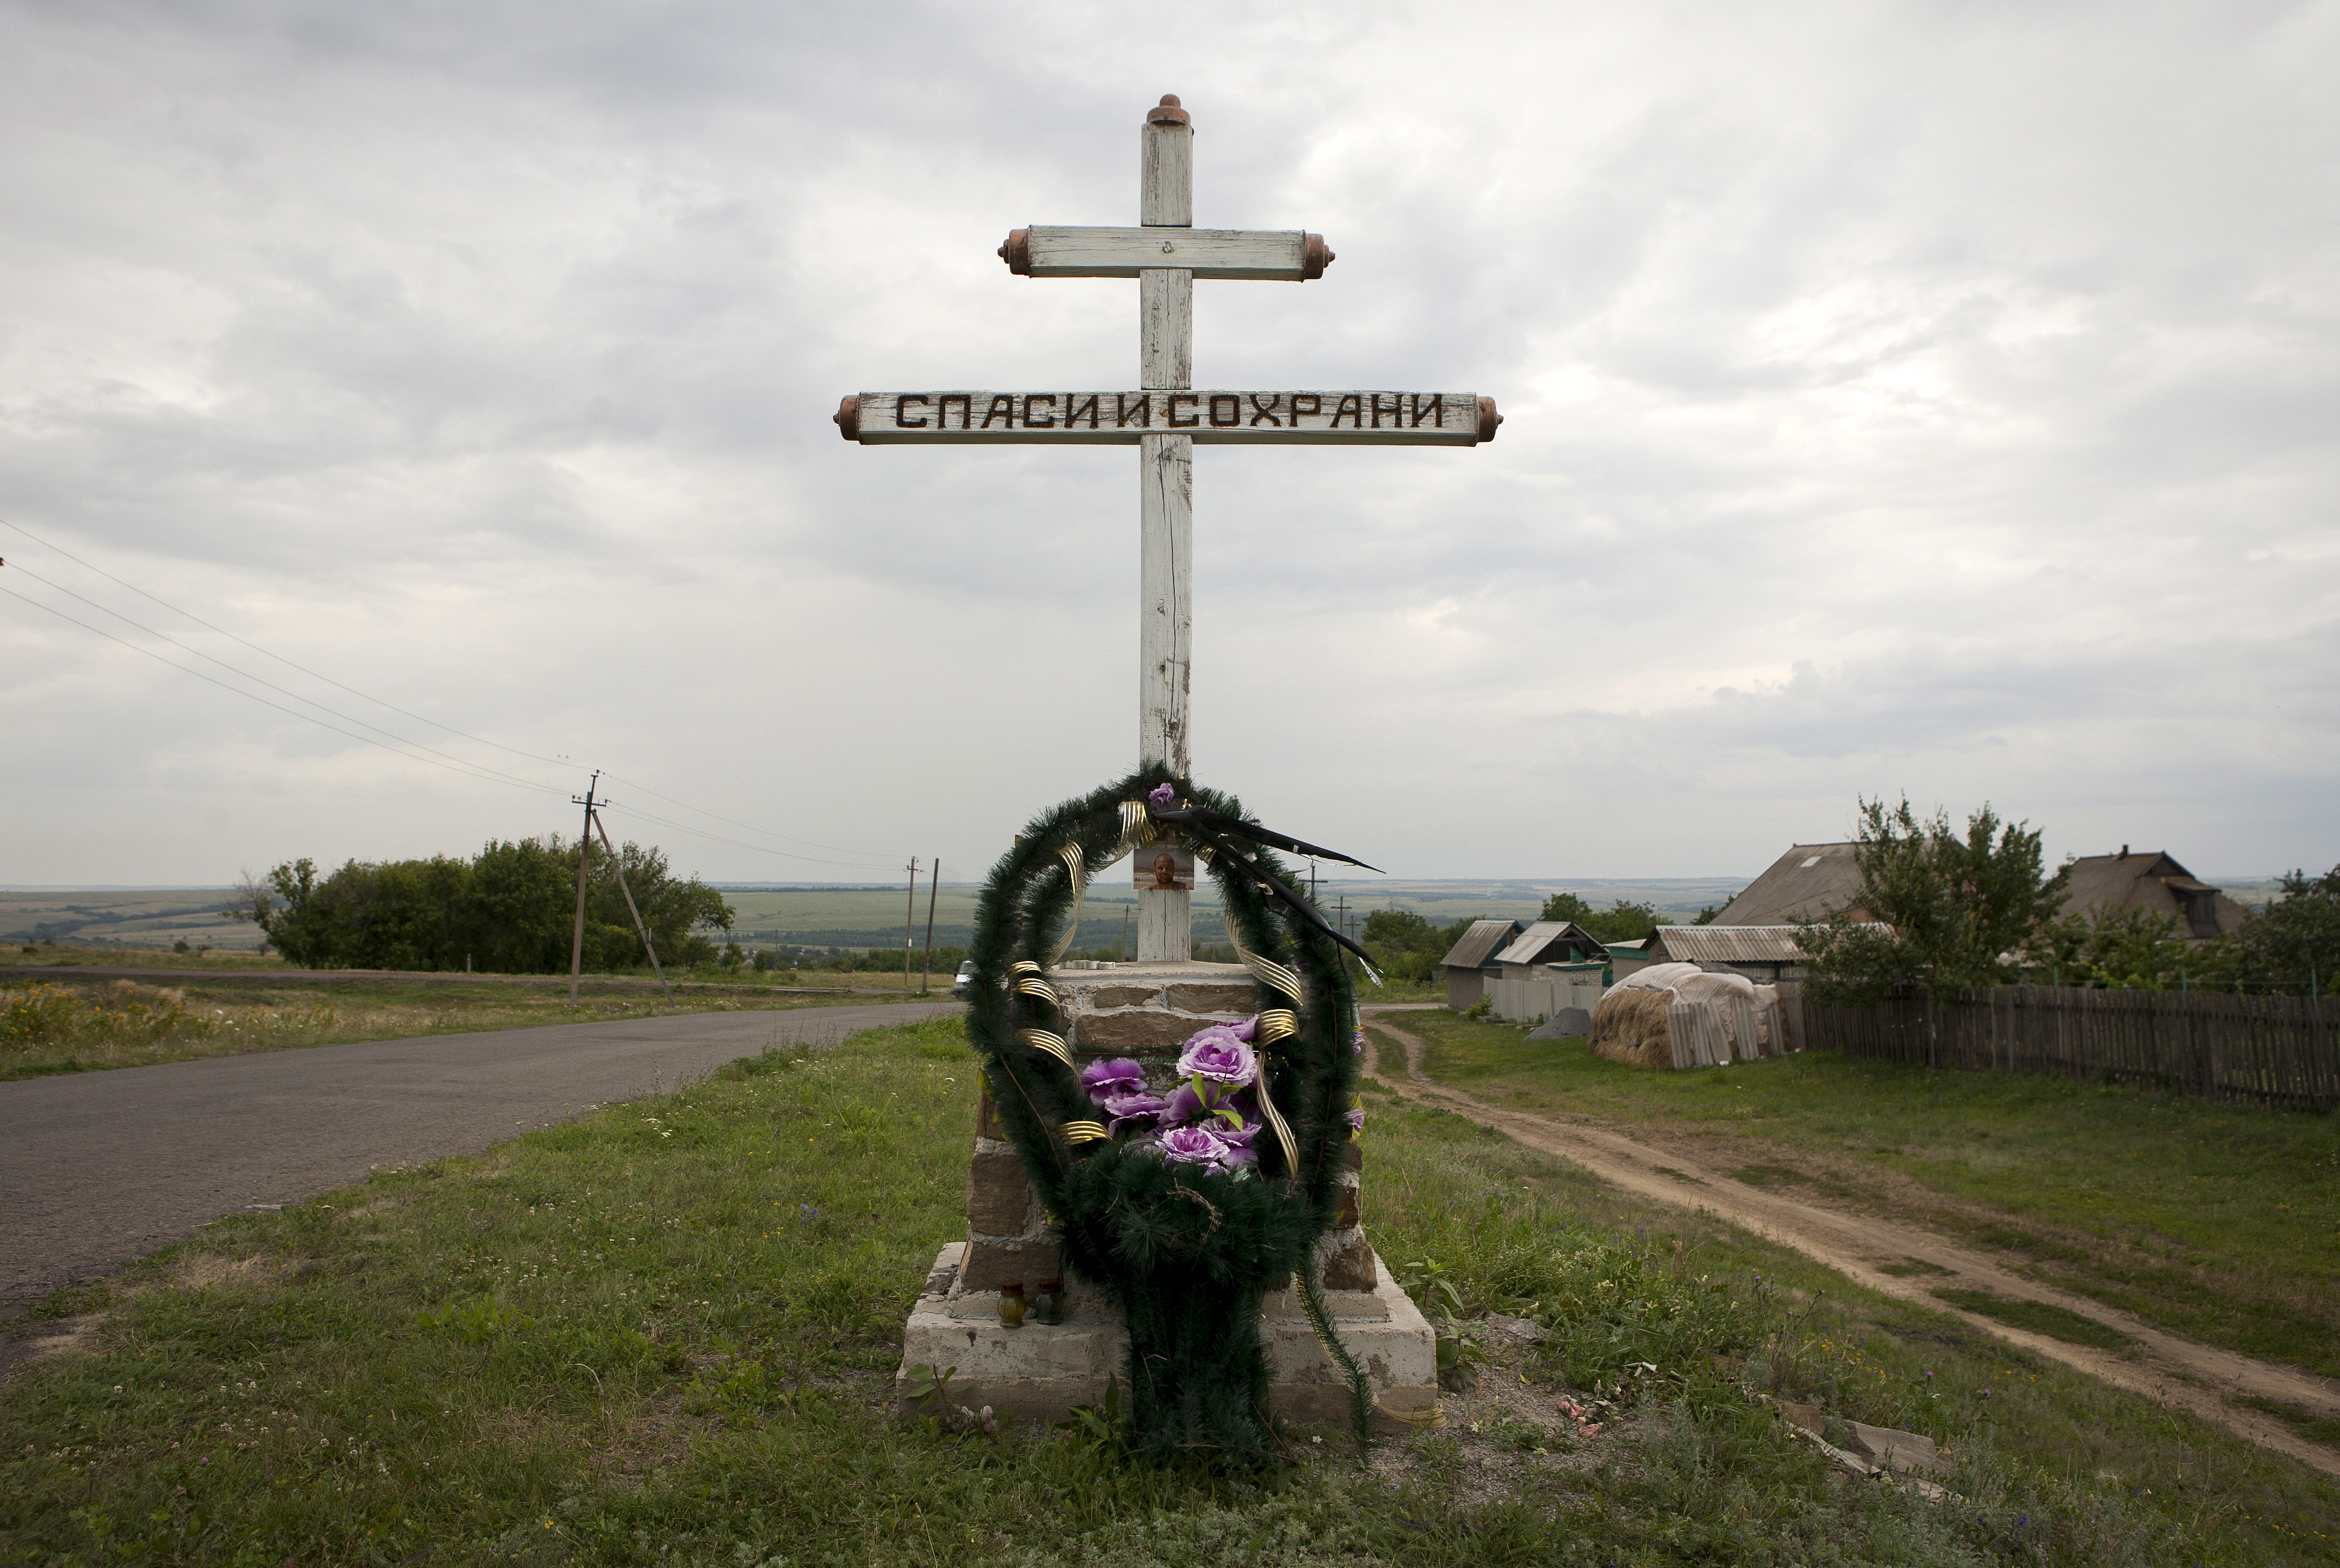 A wreath is placed on a cross with an inscription that reads 